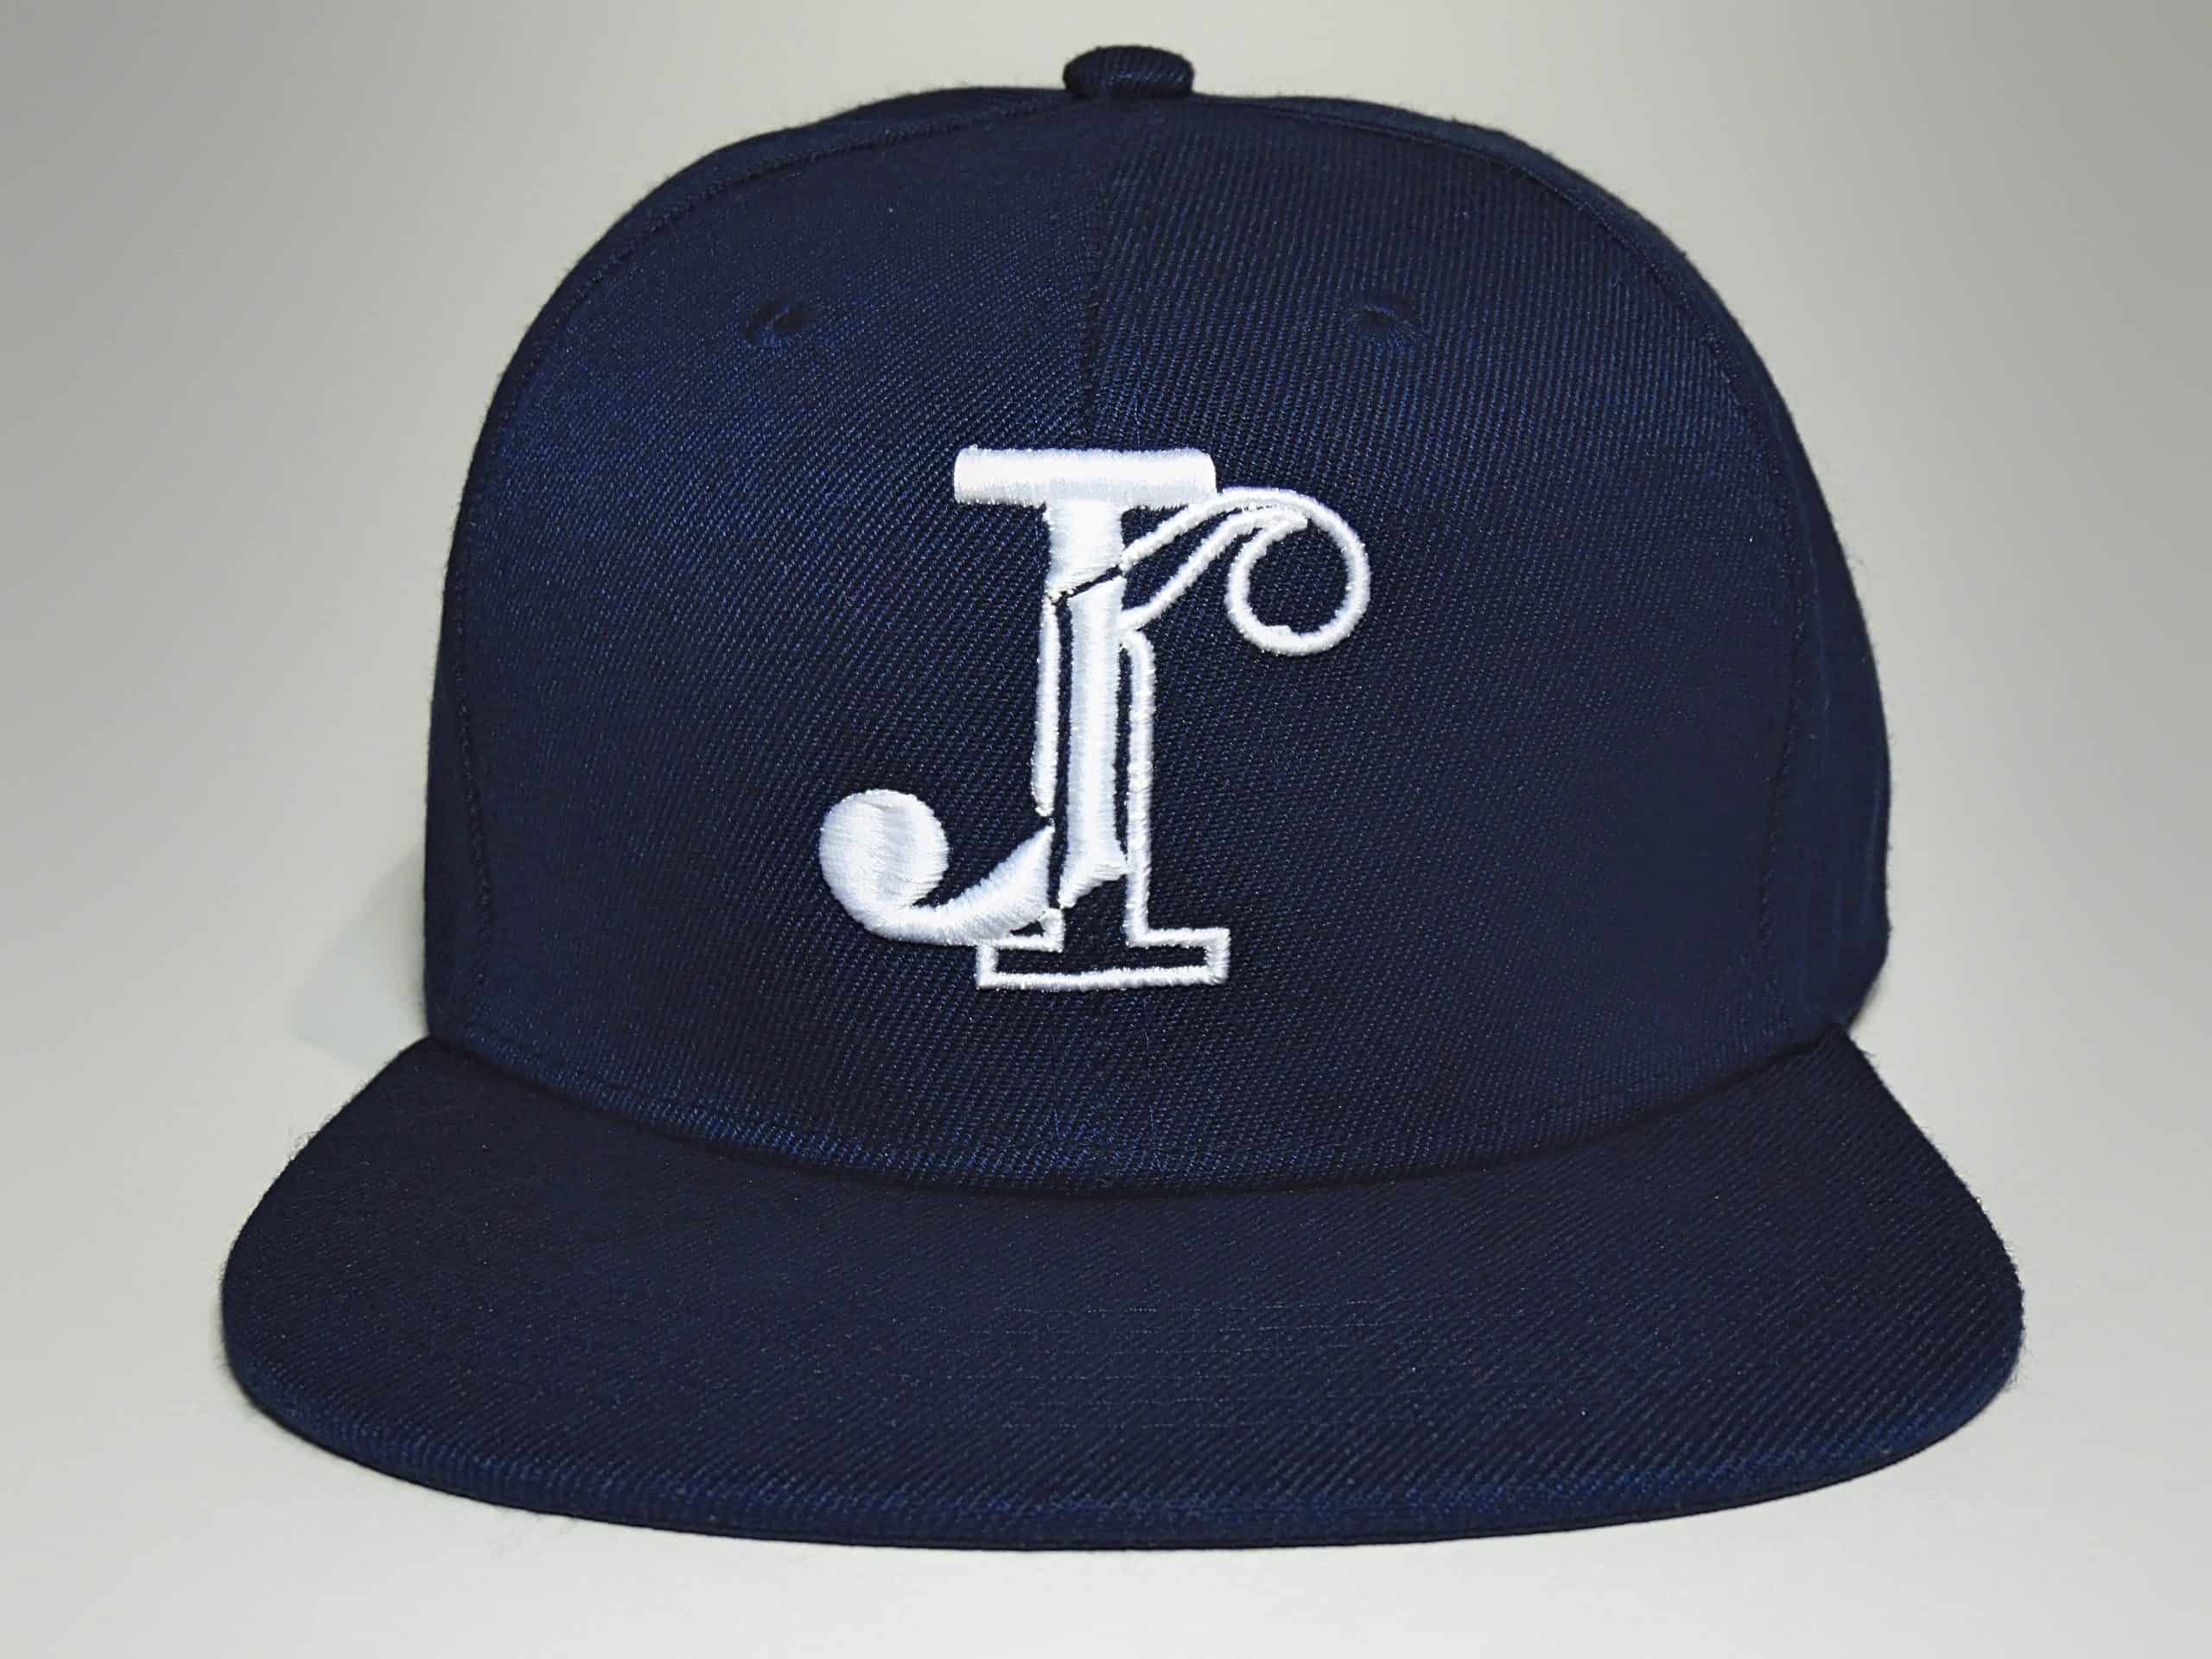 Jean-Jacques White Navy lettering, Snapback Blue Baseball with Cap